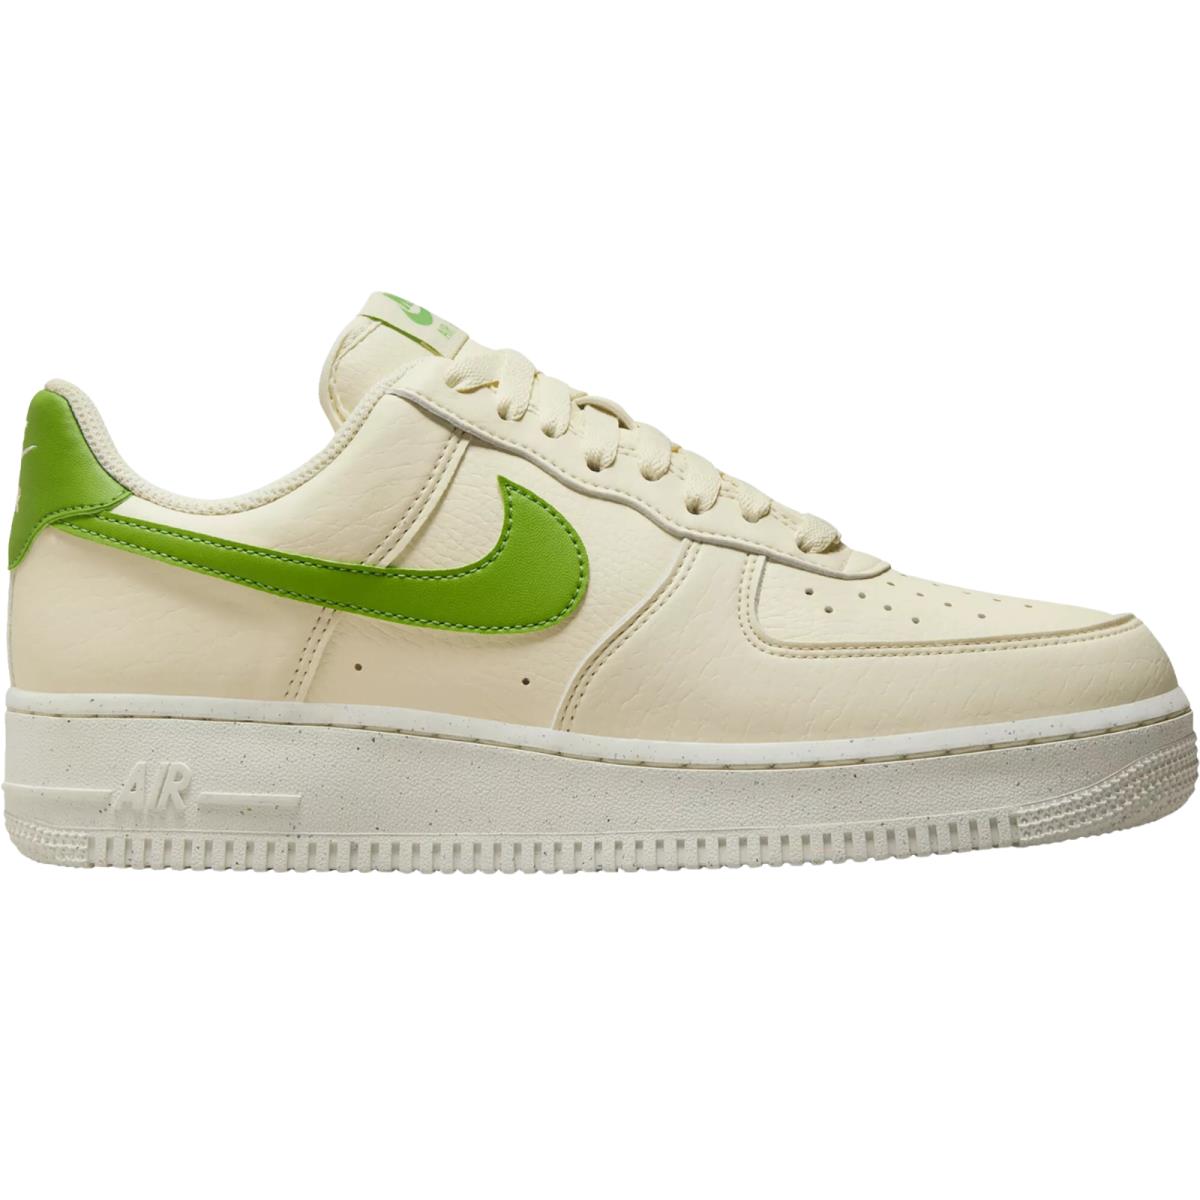 Nike Air Force 1 Women`s Casual Shoes All Colors US Sizes 6-11 Coconut Milk/Chlorophyll/Sail/Volt/Black